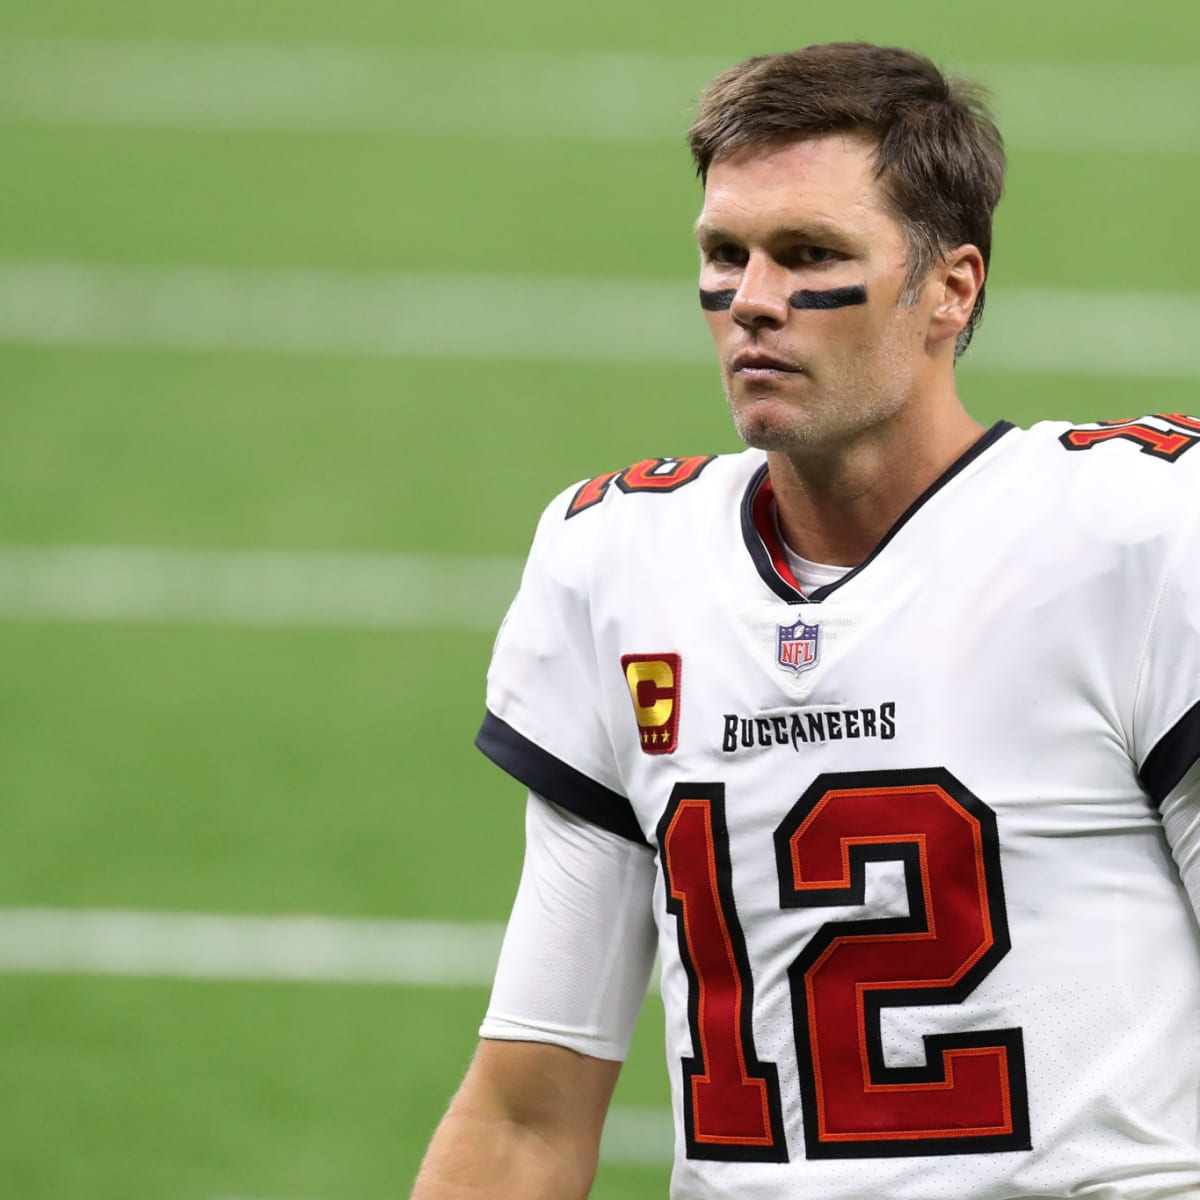 Tom Brady has five of NFL's Top 10 selling jerseys as a Tampa Bay